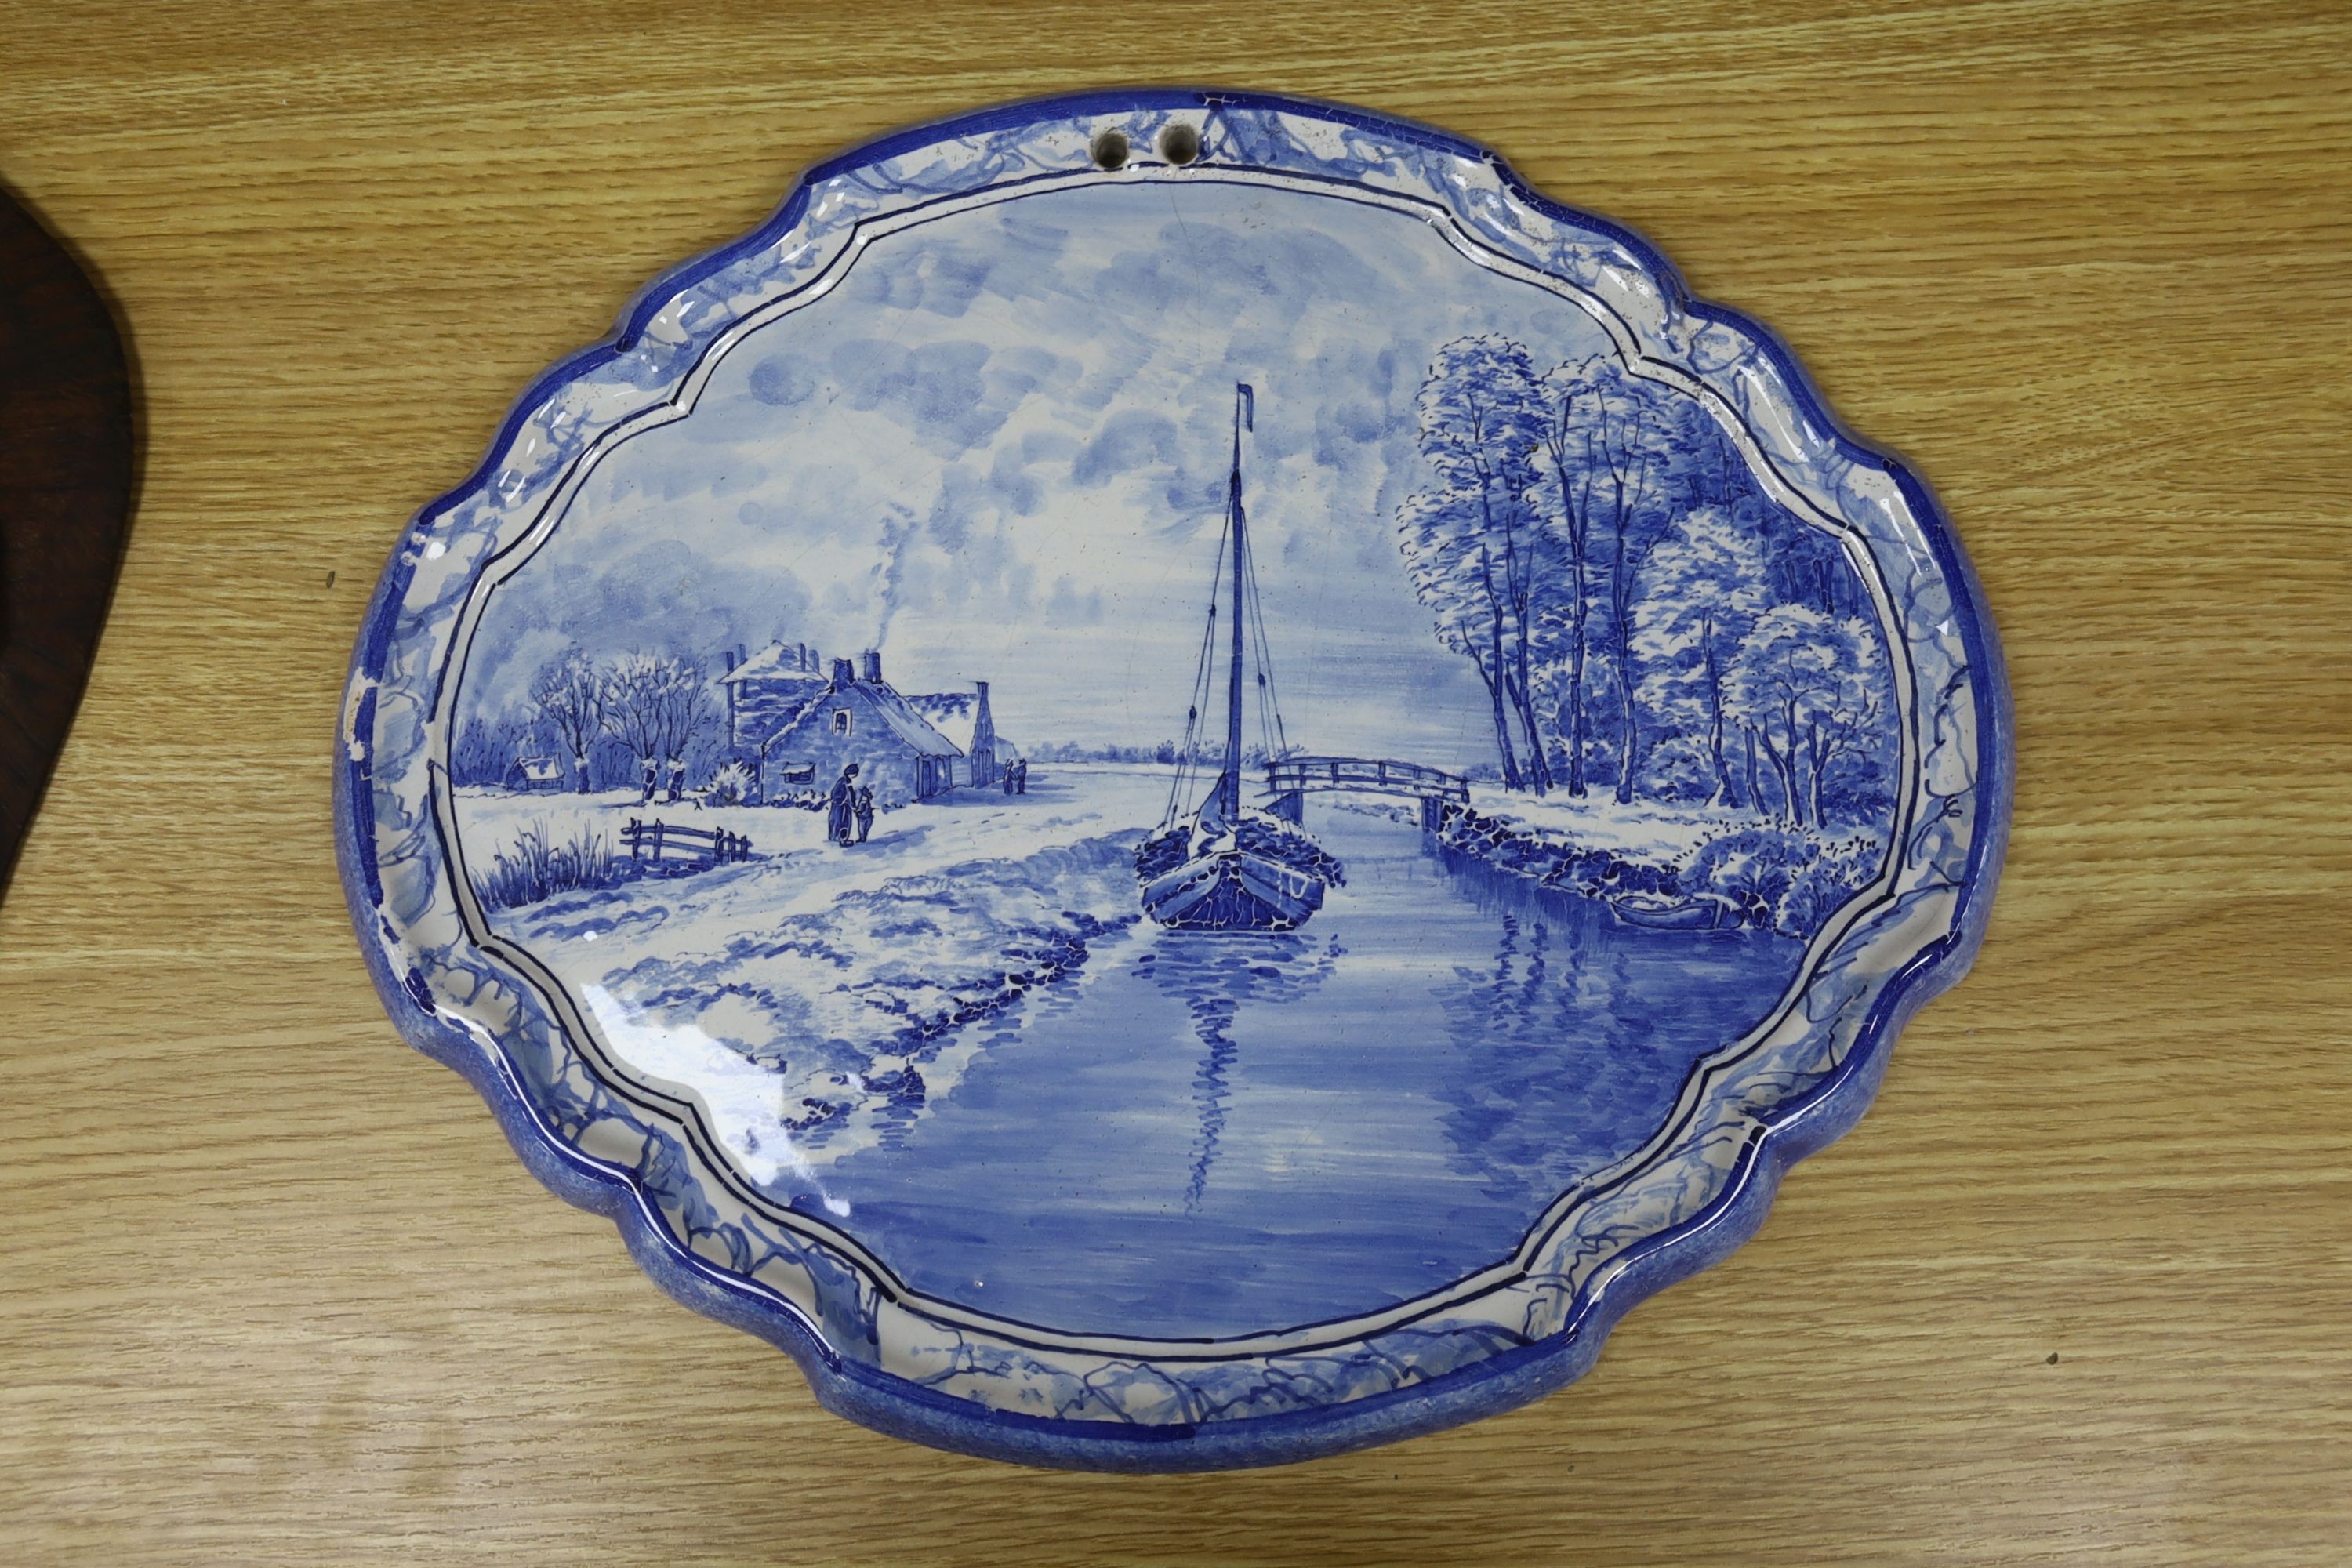 A Thoune, Swiss painted pottery dish, two Delft plaques and a Foresters jardiniere, largest 36cm